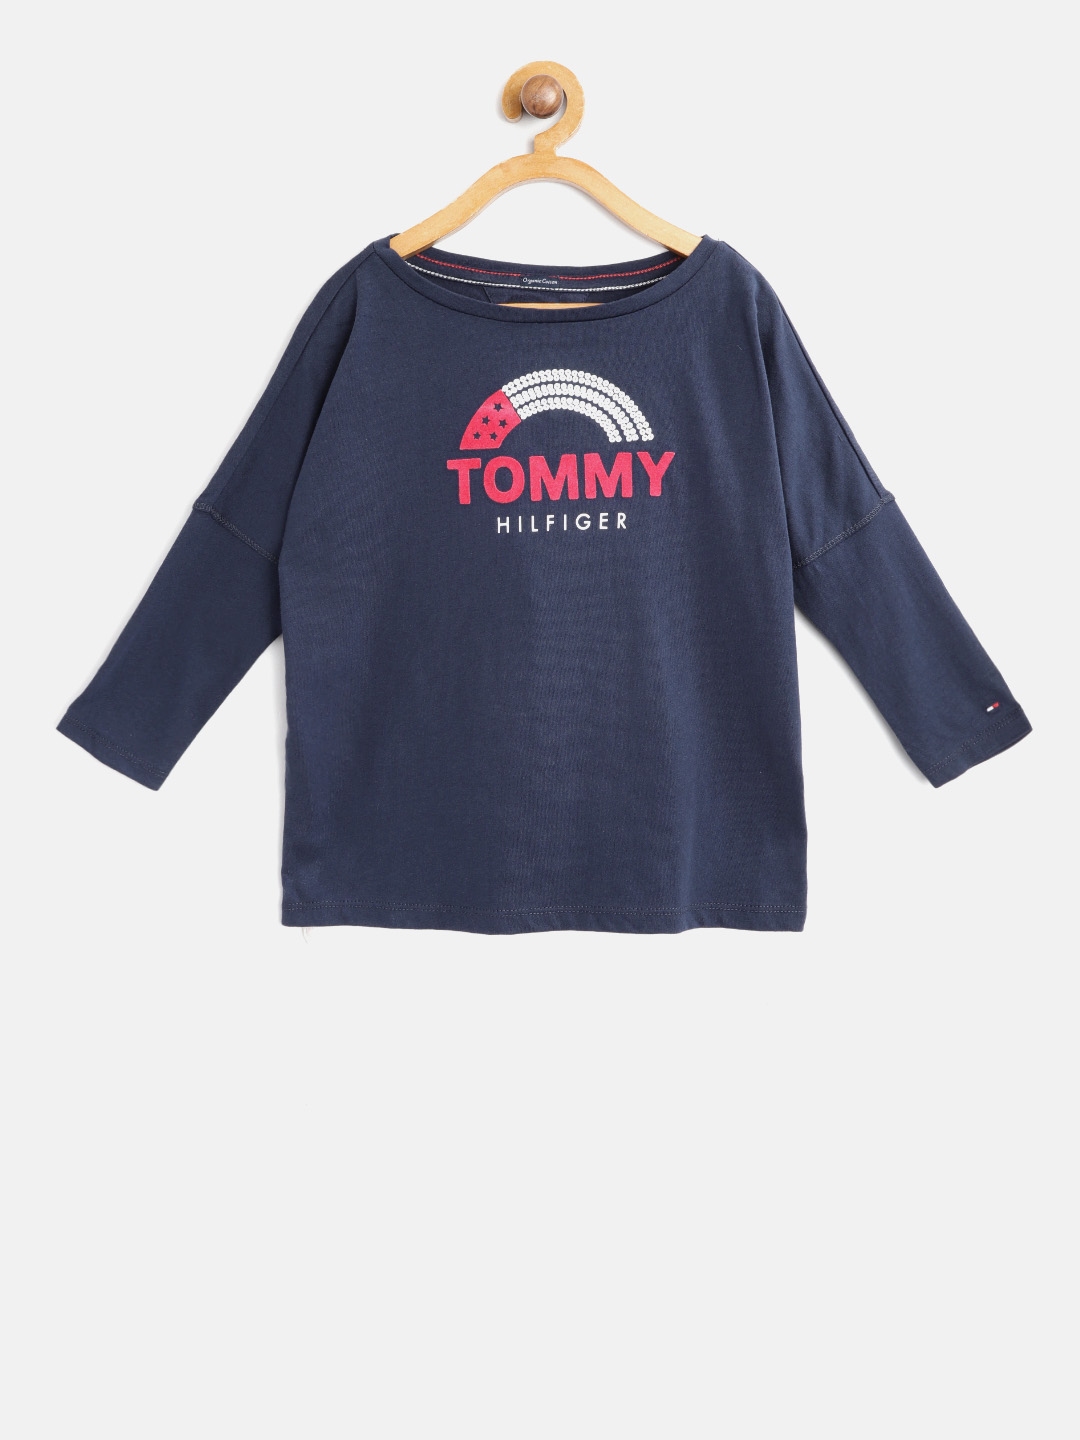 Buy Tommy Hilfiger Girls Navy Blue Printed Pure Cotton Top - Tops for ...